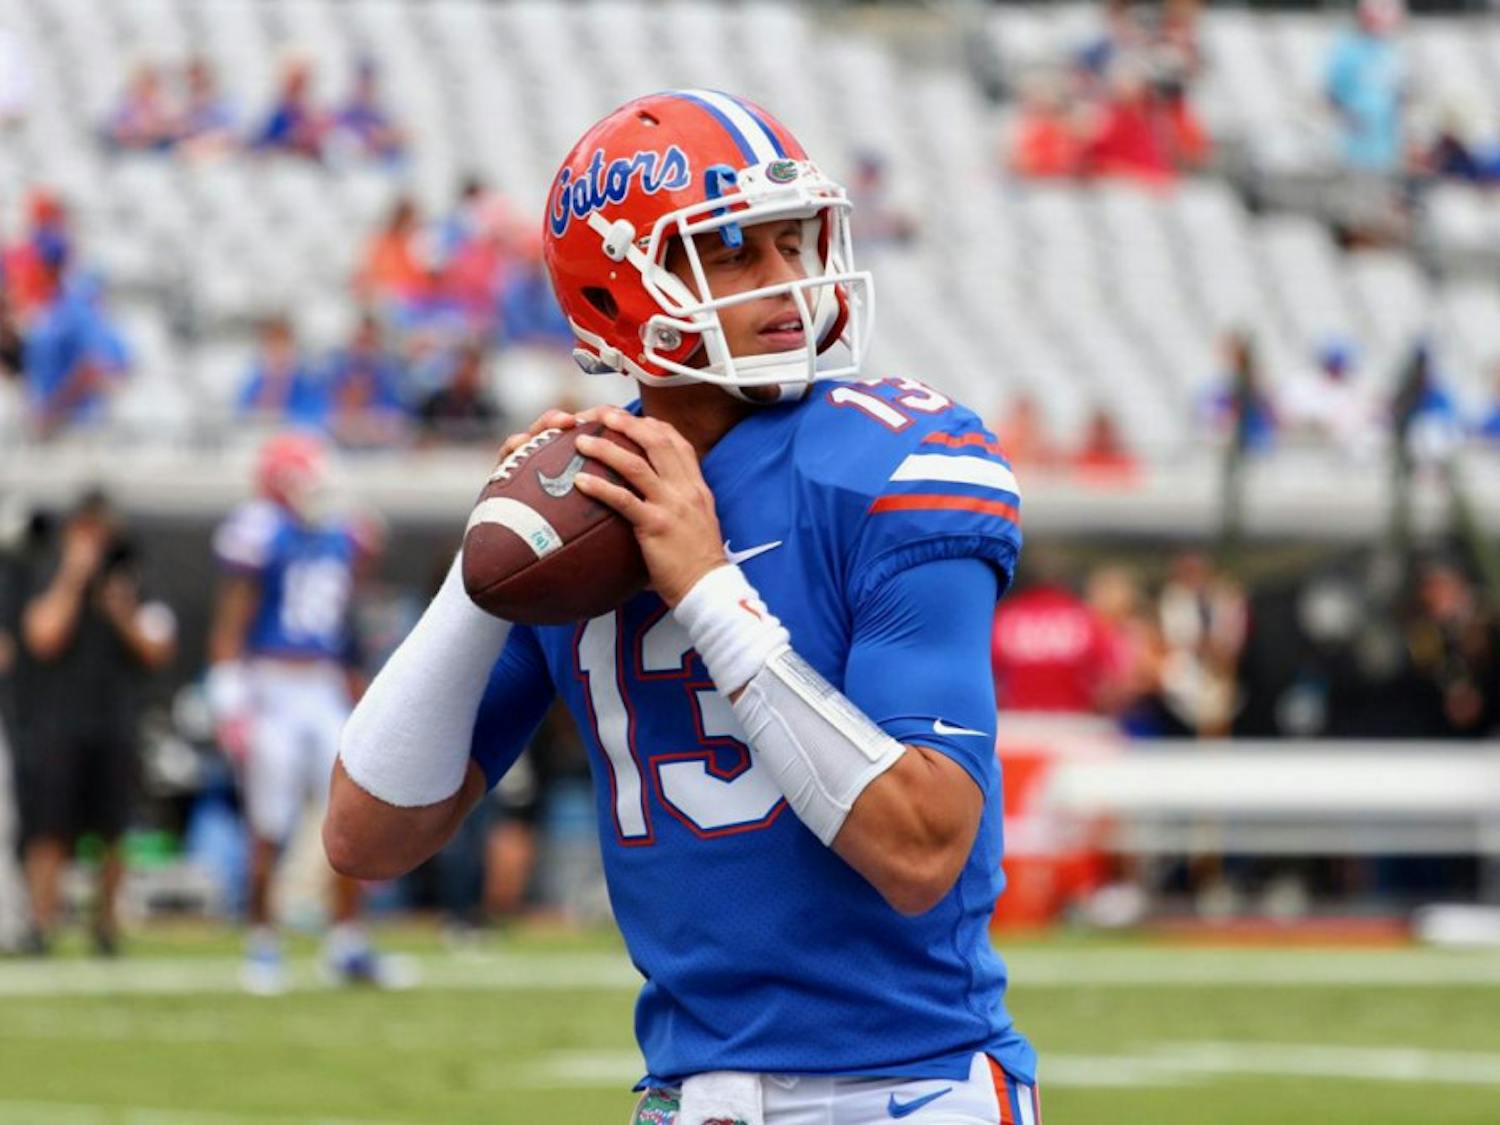 Feleipe Franks threw for 117 passing yards and recorded three total touchdowns in UF's Orange and Blue Game on Saturday.